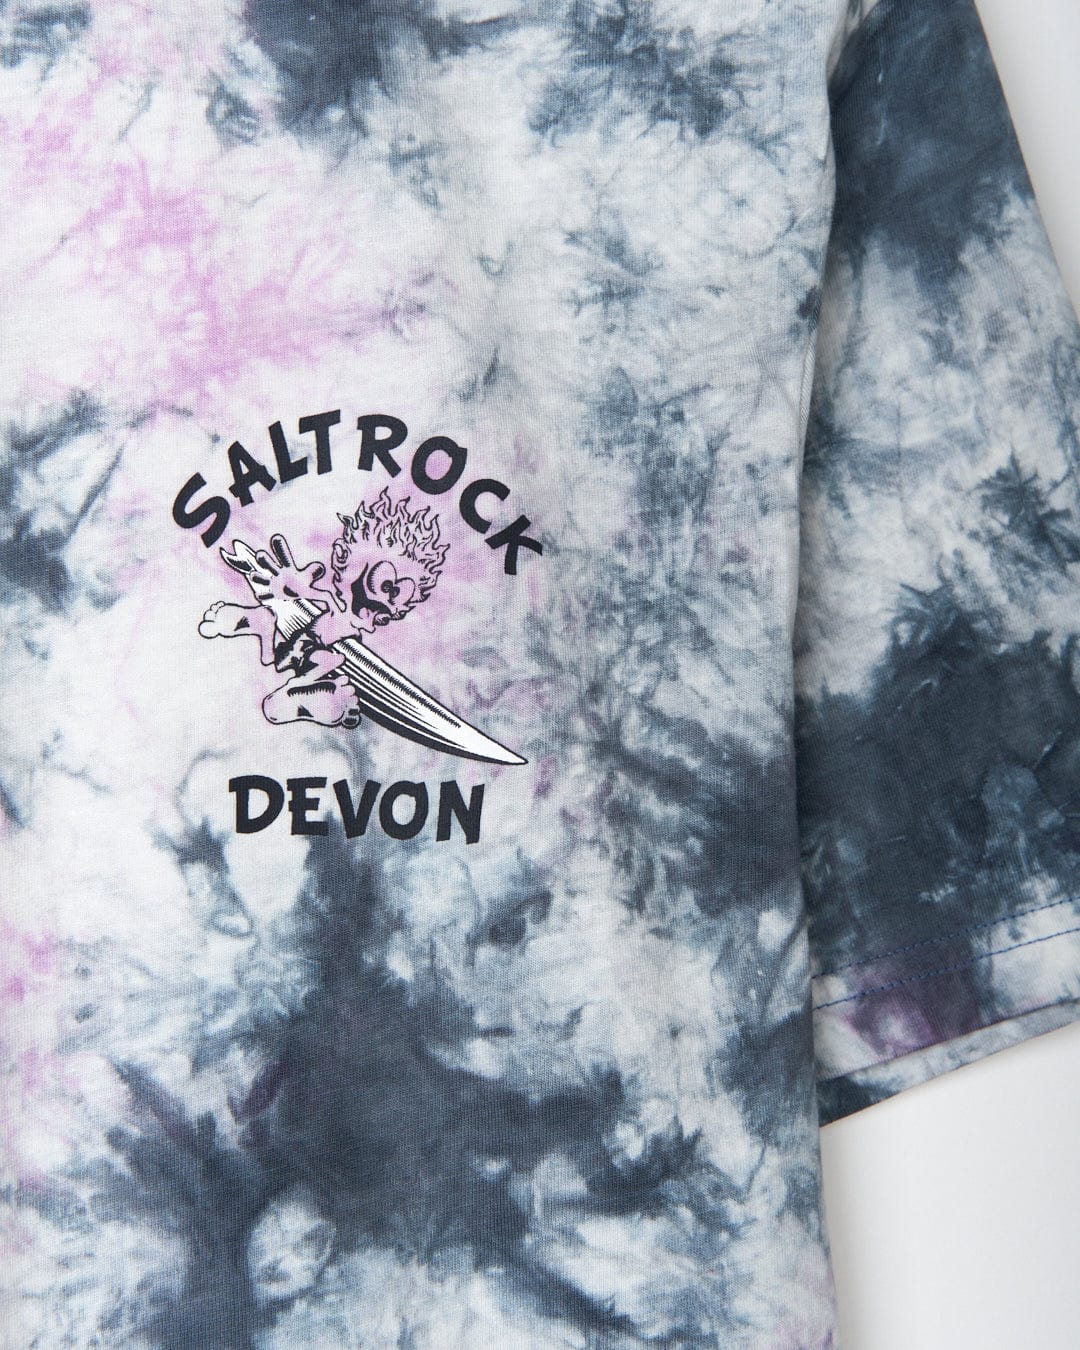 Replace the product in the sentence with: Wave Rider Devon - Mens Short Sleeve T-Shirt - Tie Dye Pink/Grey from Saltrock.